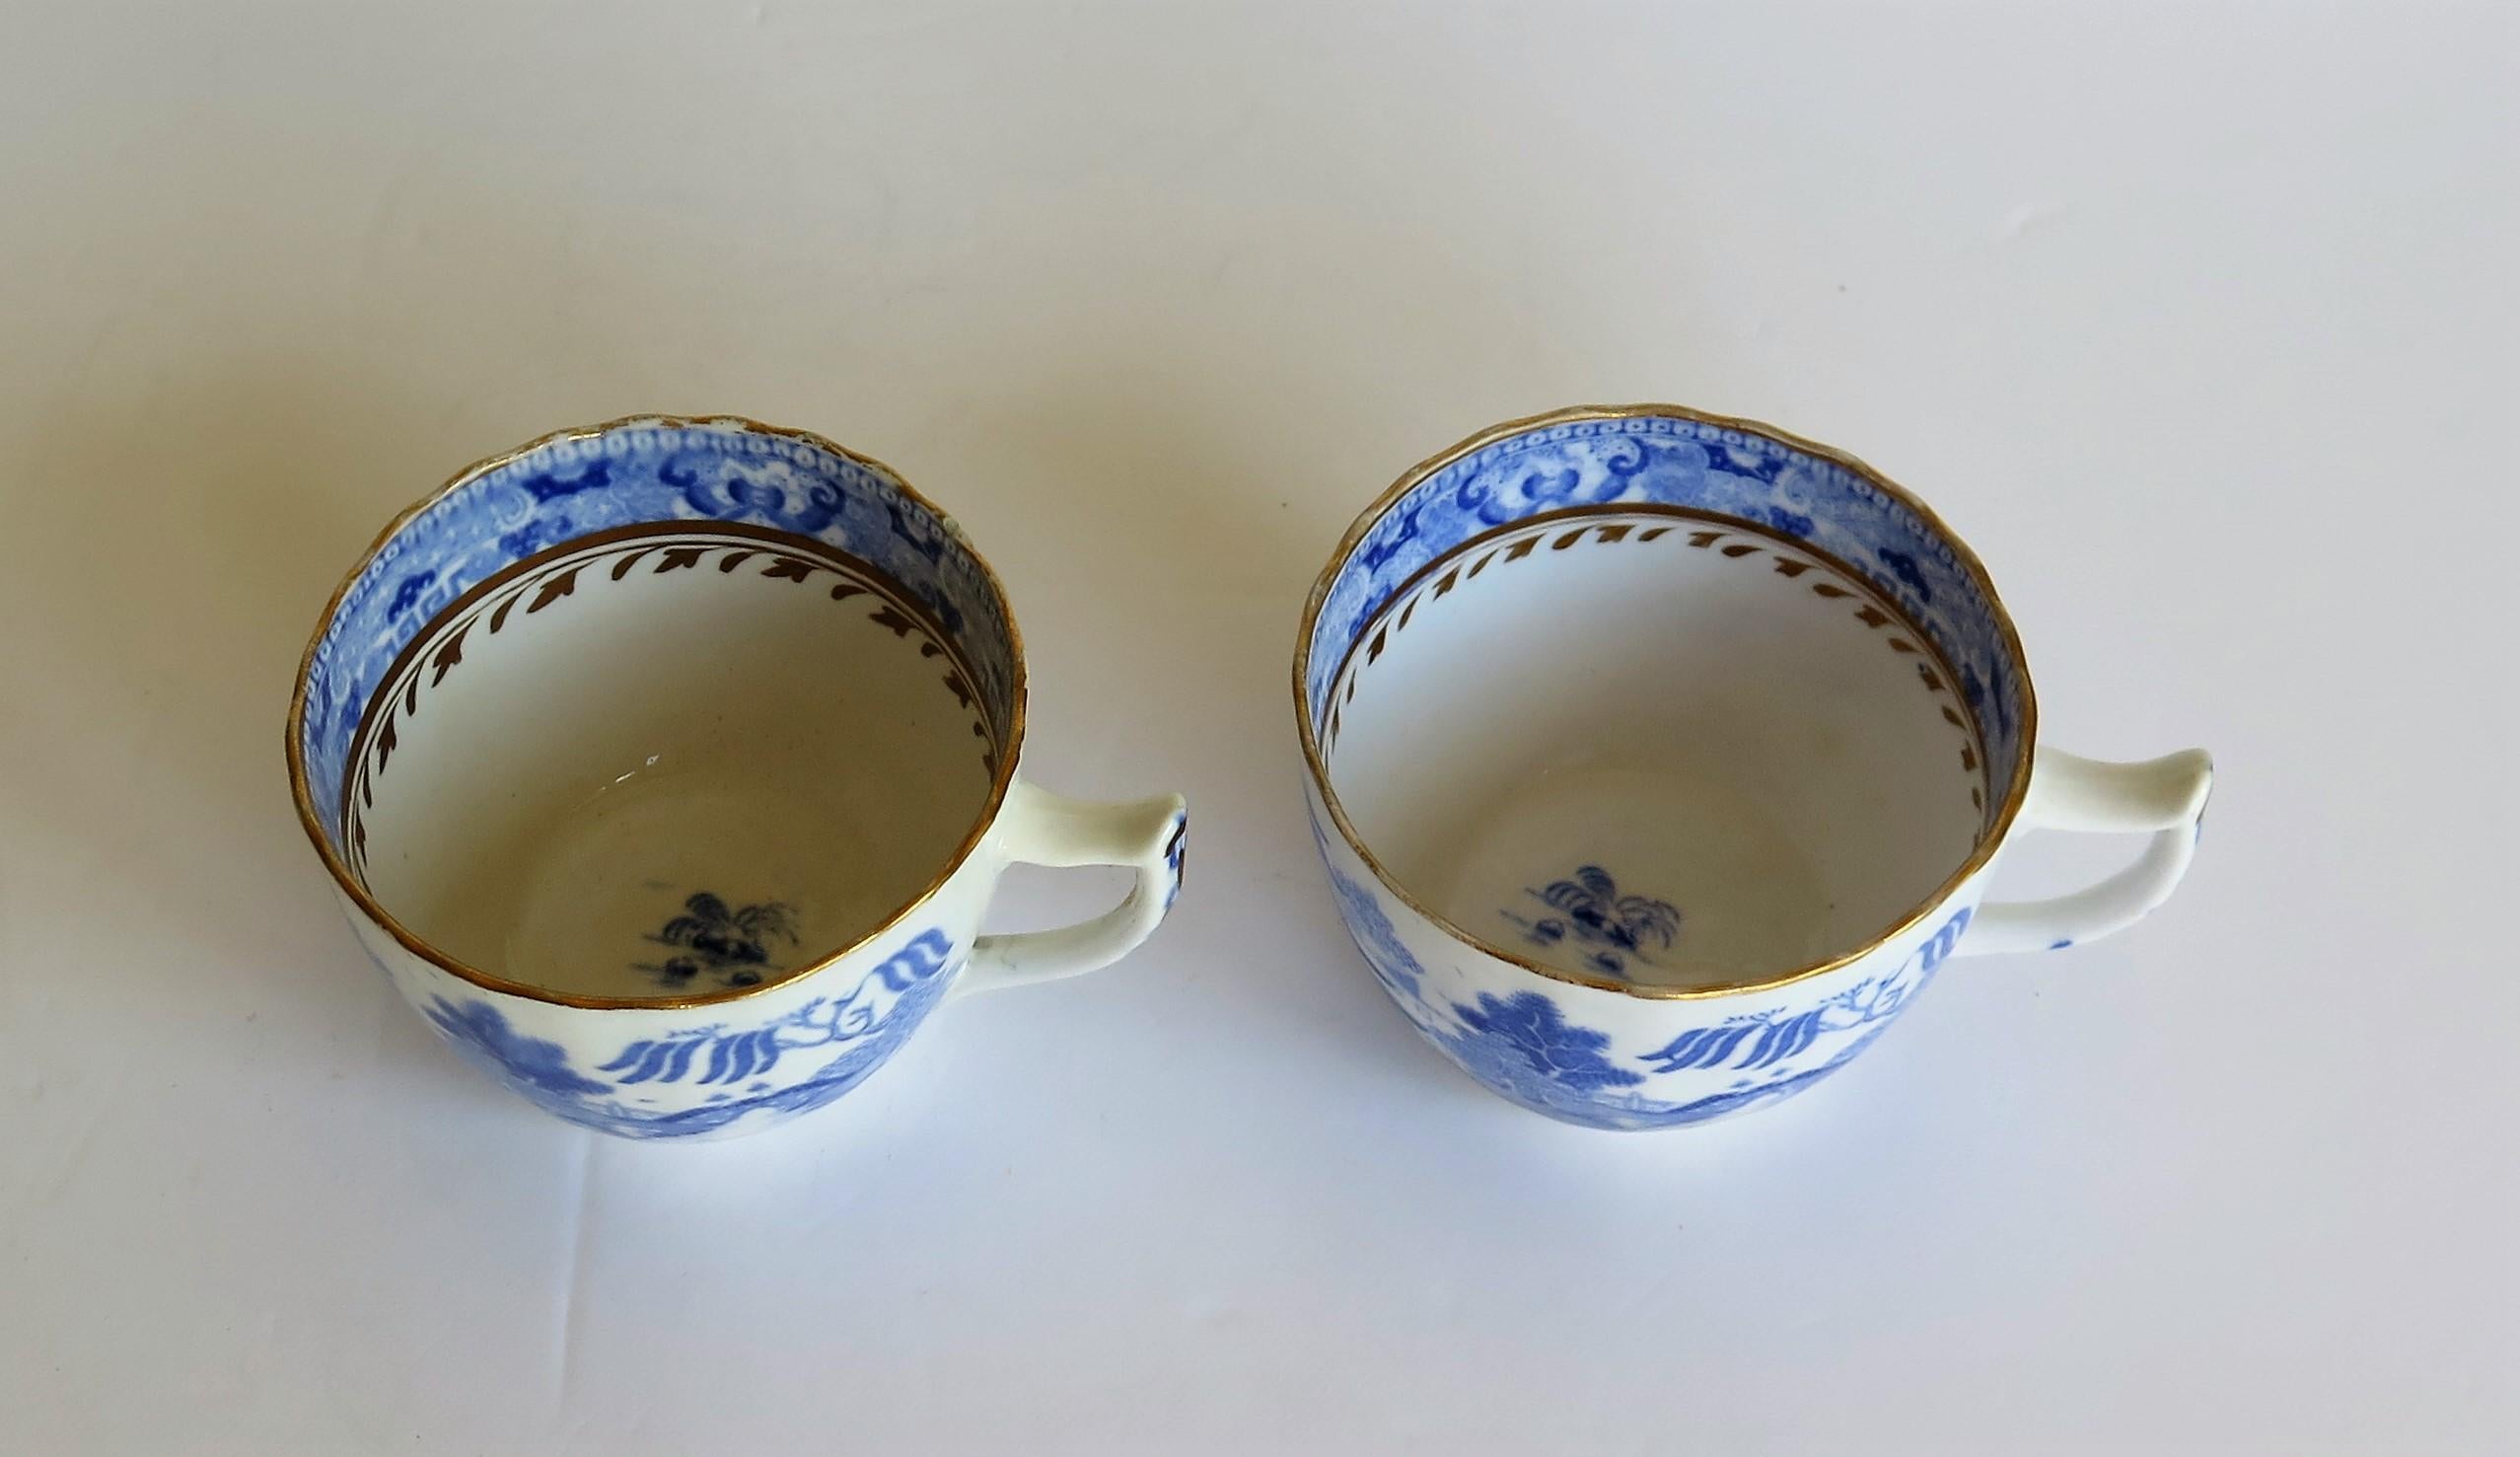 Miles Mason Porcelain Pair of Tea Cups Broseley Blue and White Pattern, Ca. 1805 For Sale 5